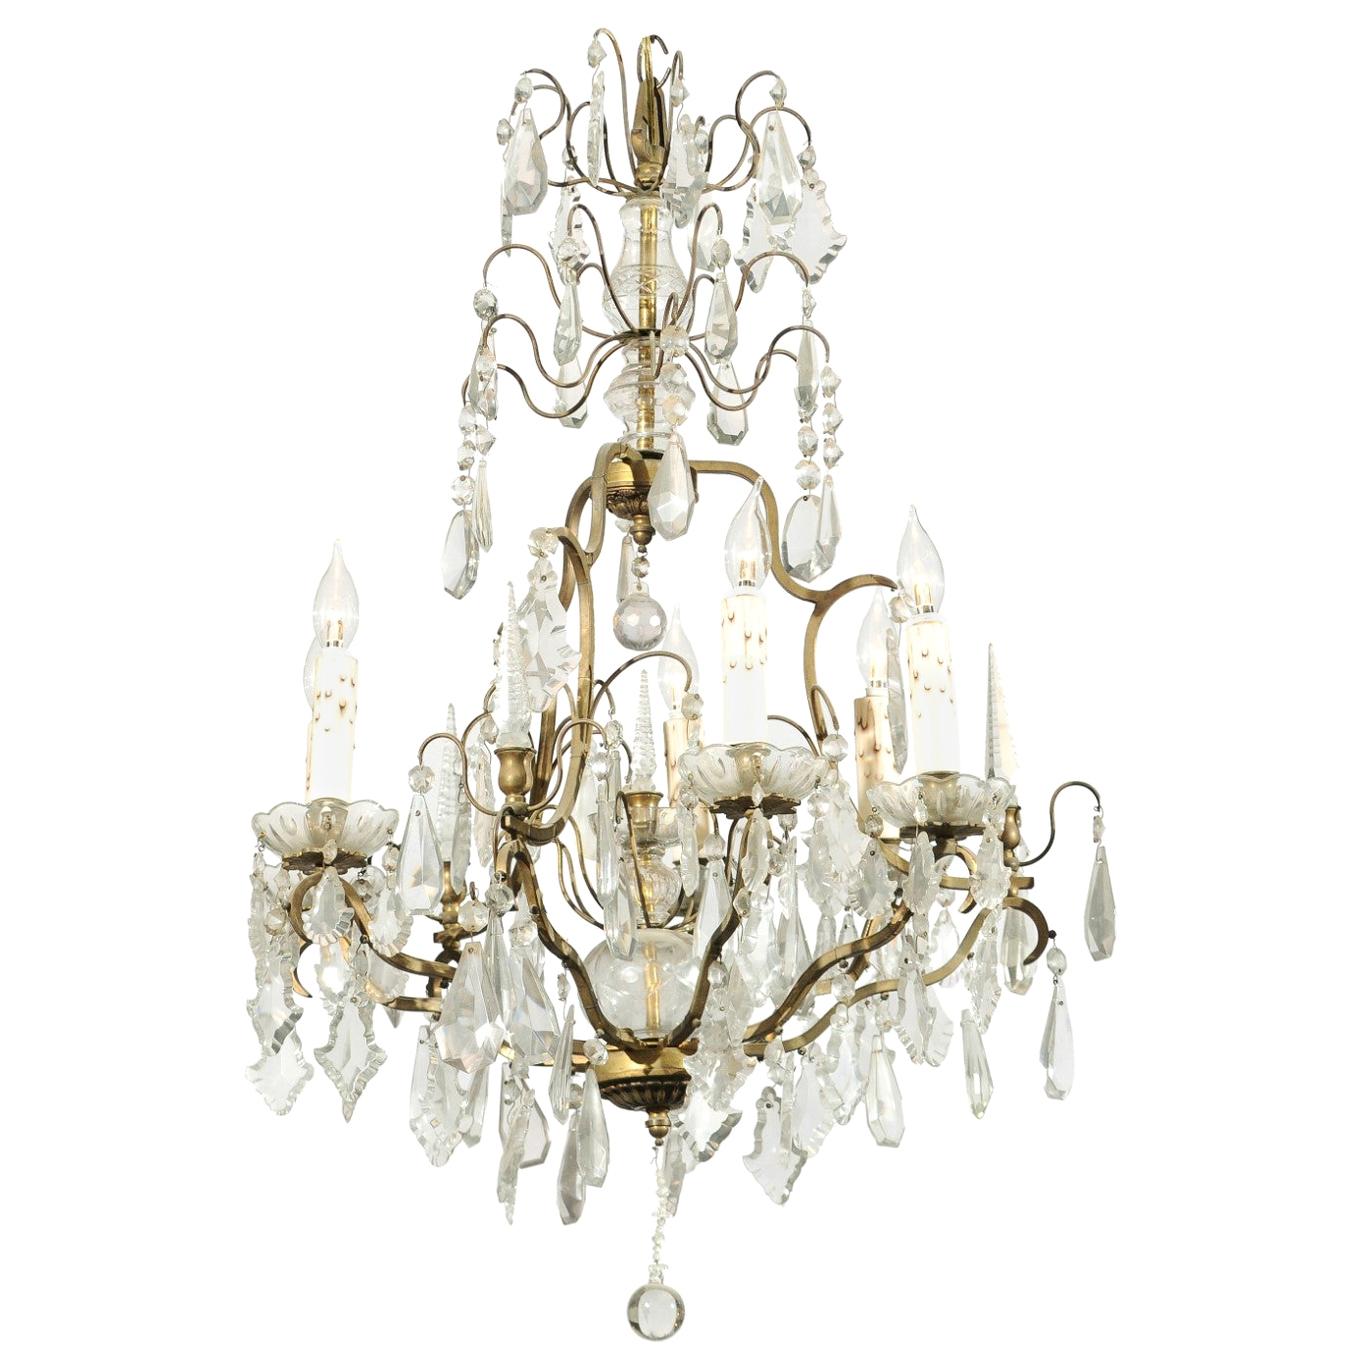 French 19th Century Crystal and Bronze Six-Light Chandelier with Obelisks